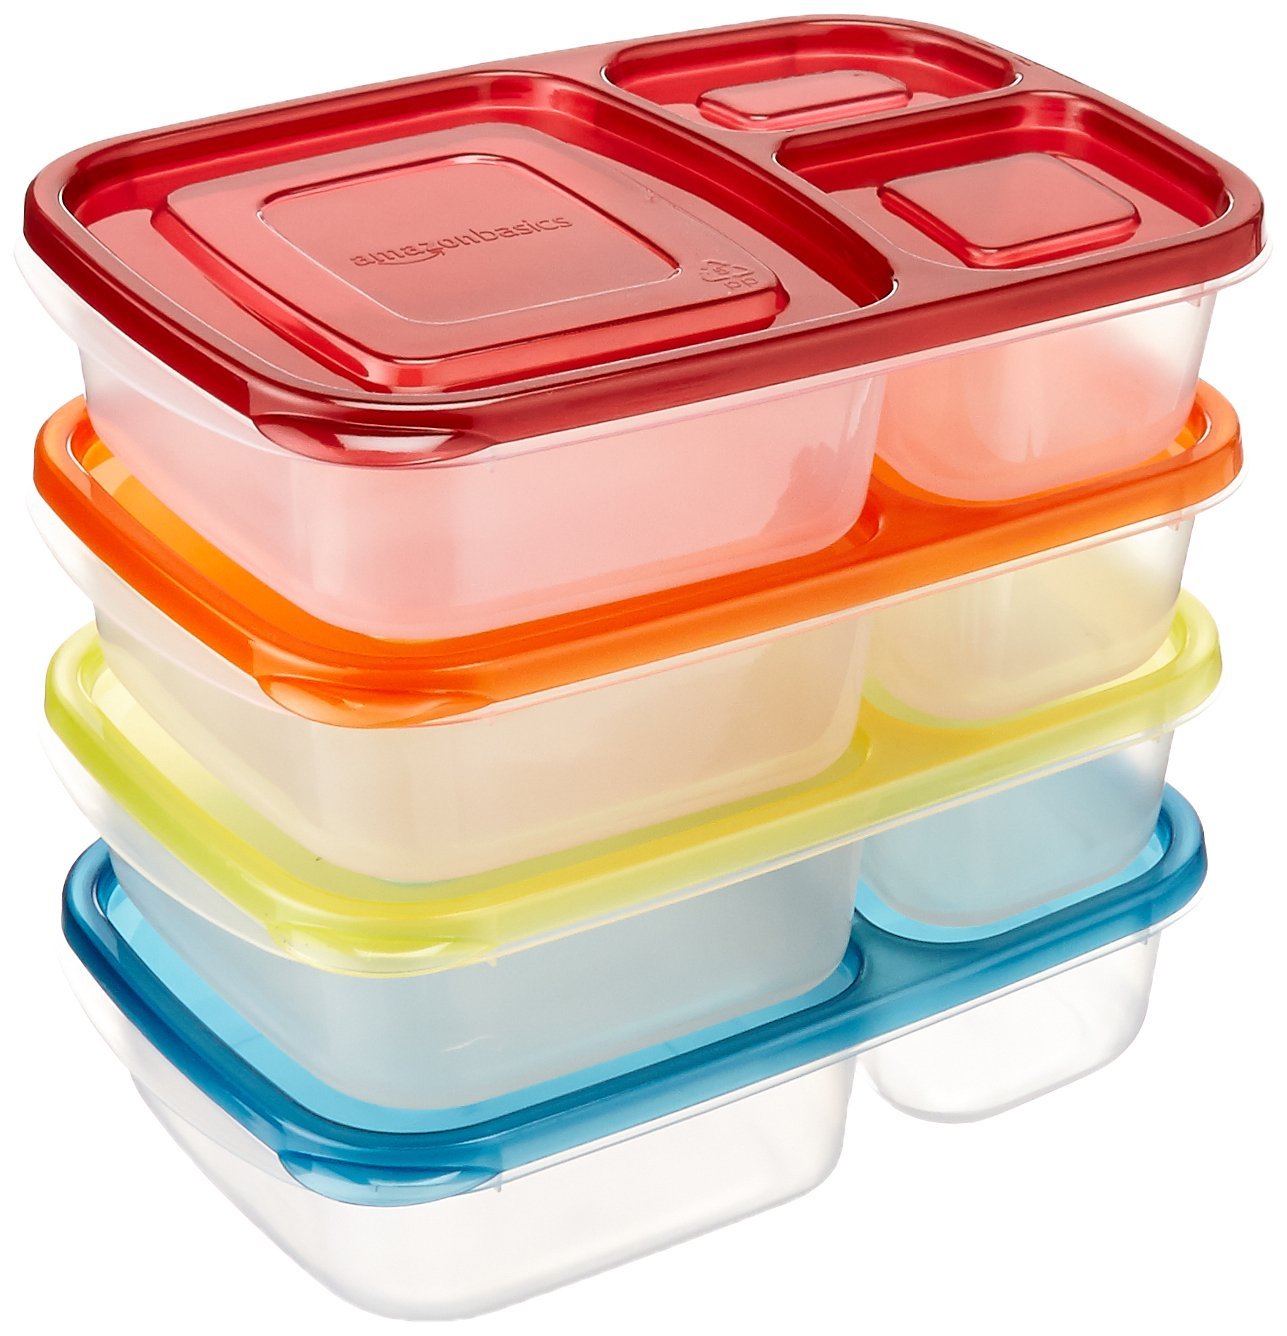 AmazonBasics Set of 4 Bento Lunch Box Containers – Just $9.99!